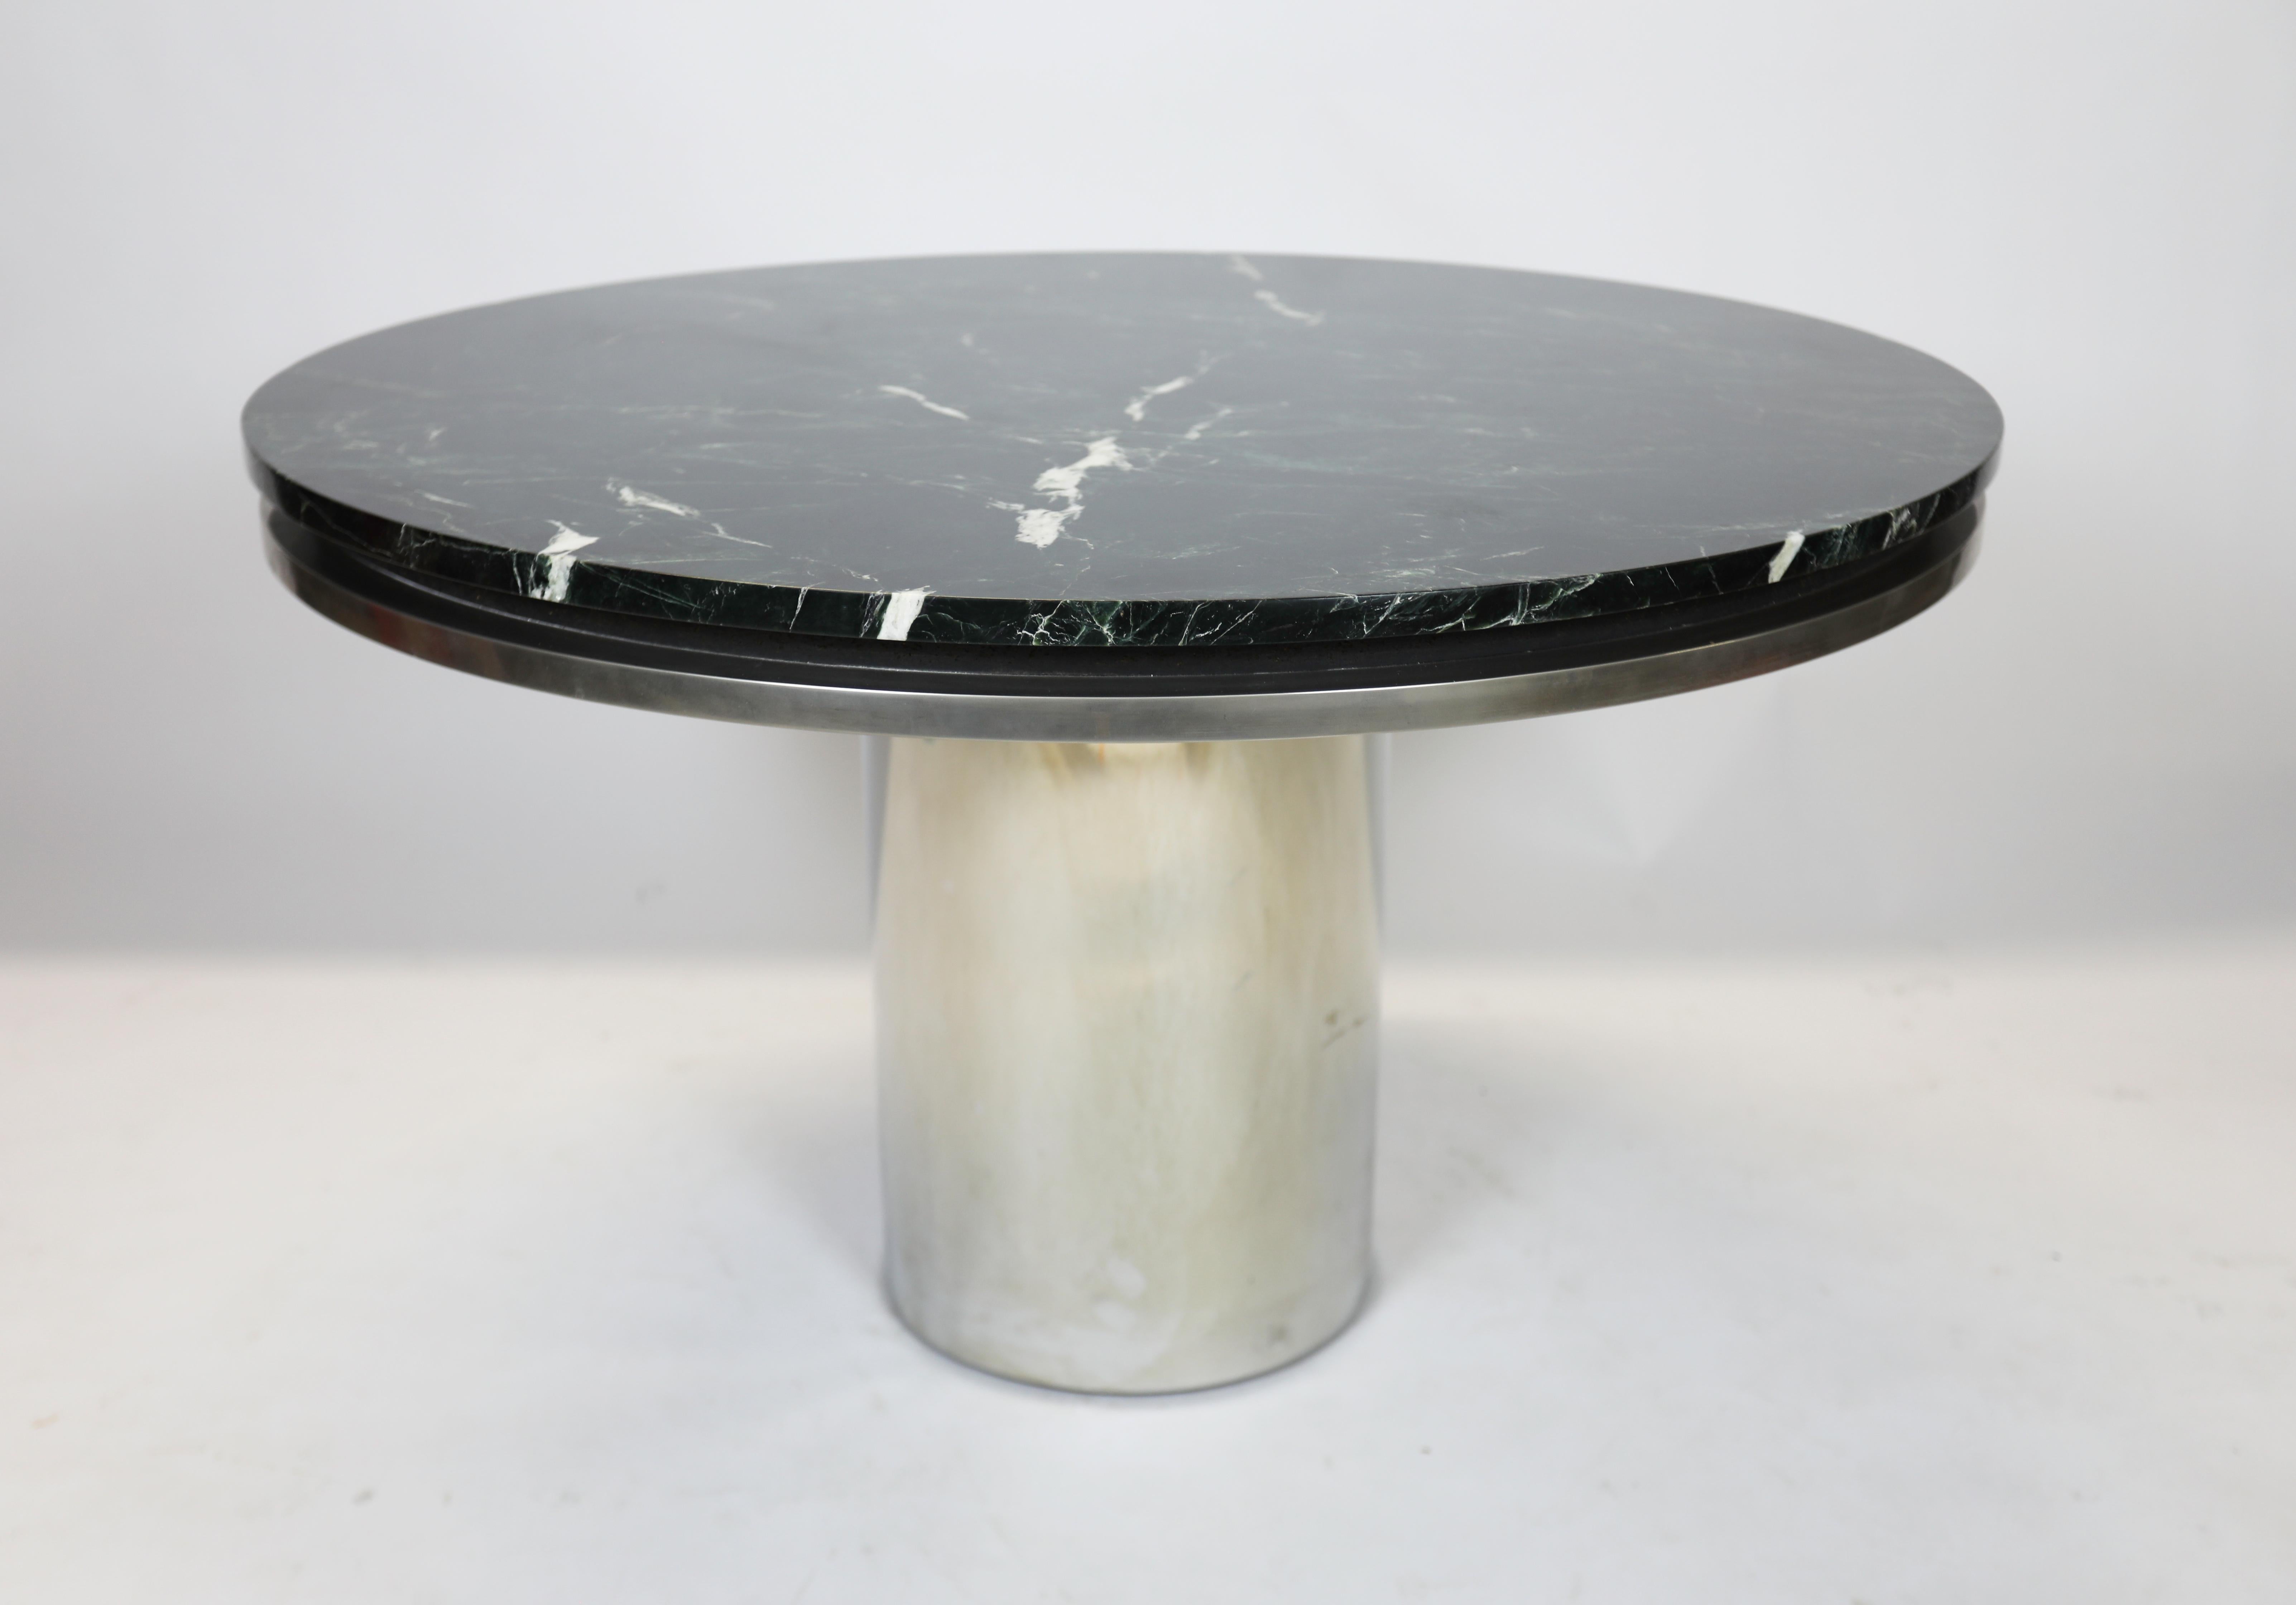 Round side table in polished stainless steel.
Beautiful dark green marble top
Authenticated by Tom Langevin.
 